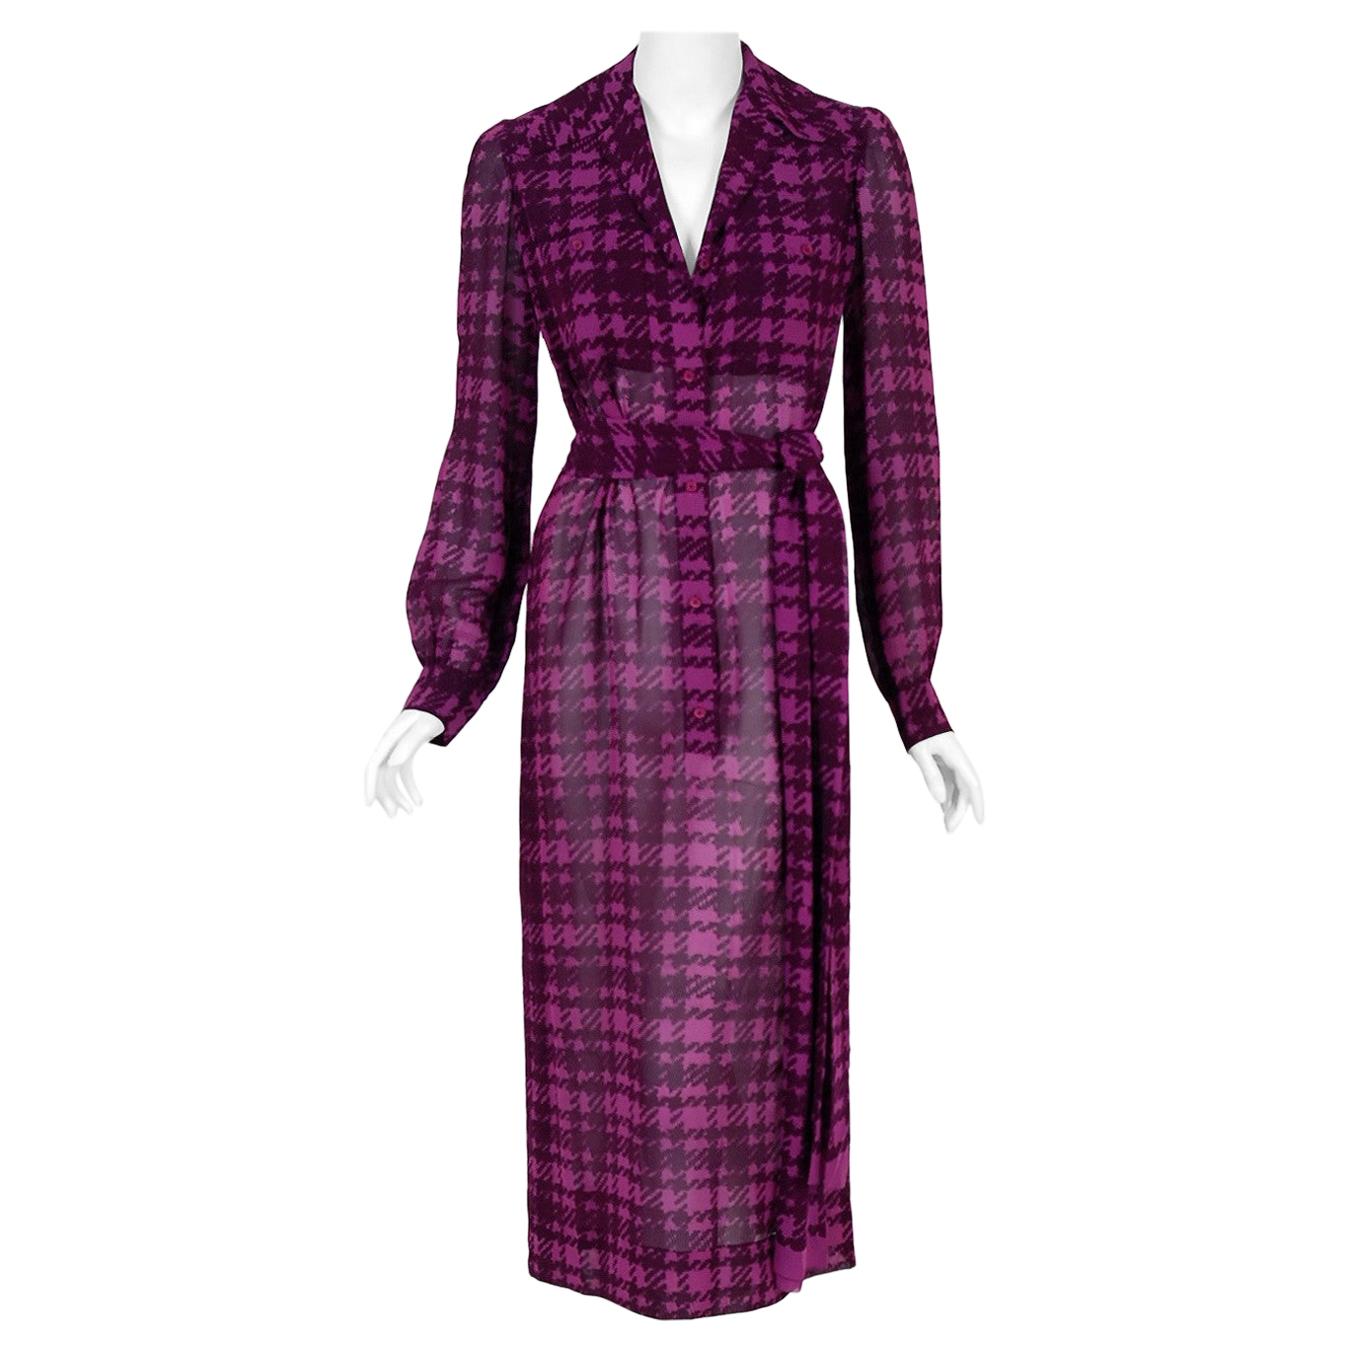 1969 Christian Dior Haute-Couture Purple Houndstooth Silk-Chiffon Belted Dress